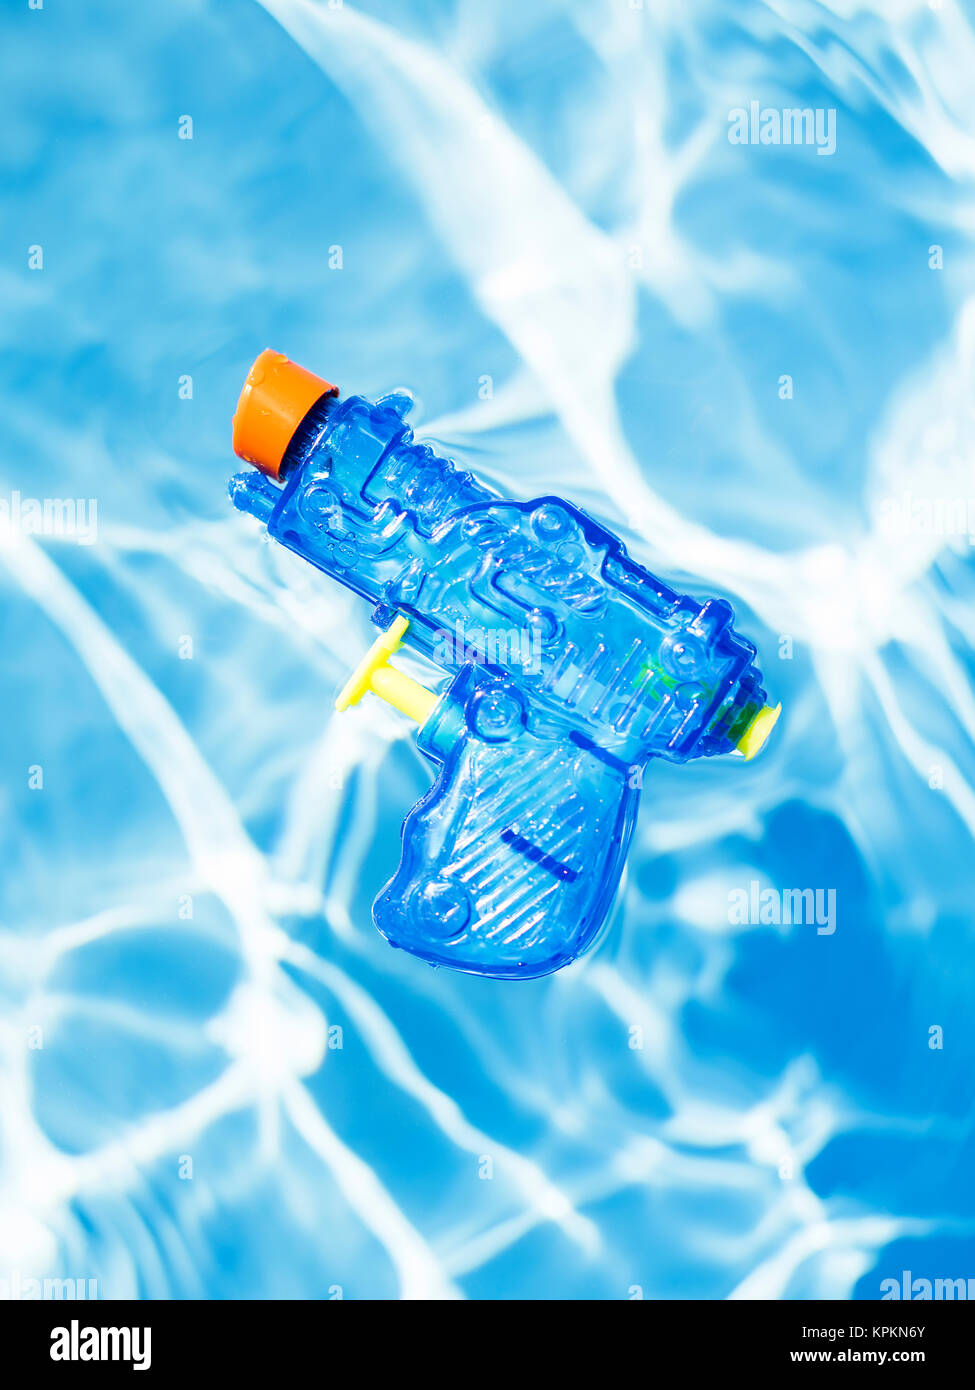 Blue squirt gun floating one water. Stock Photo